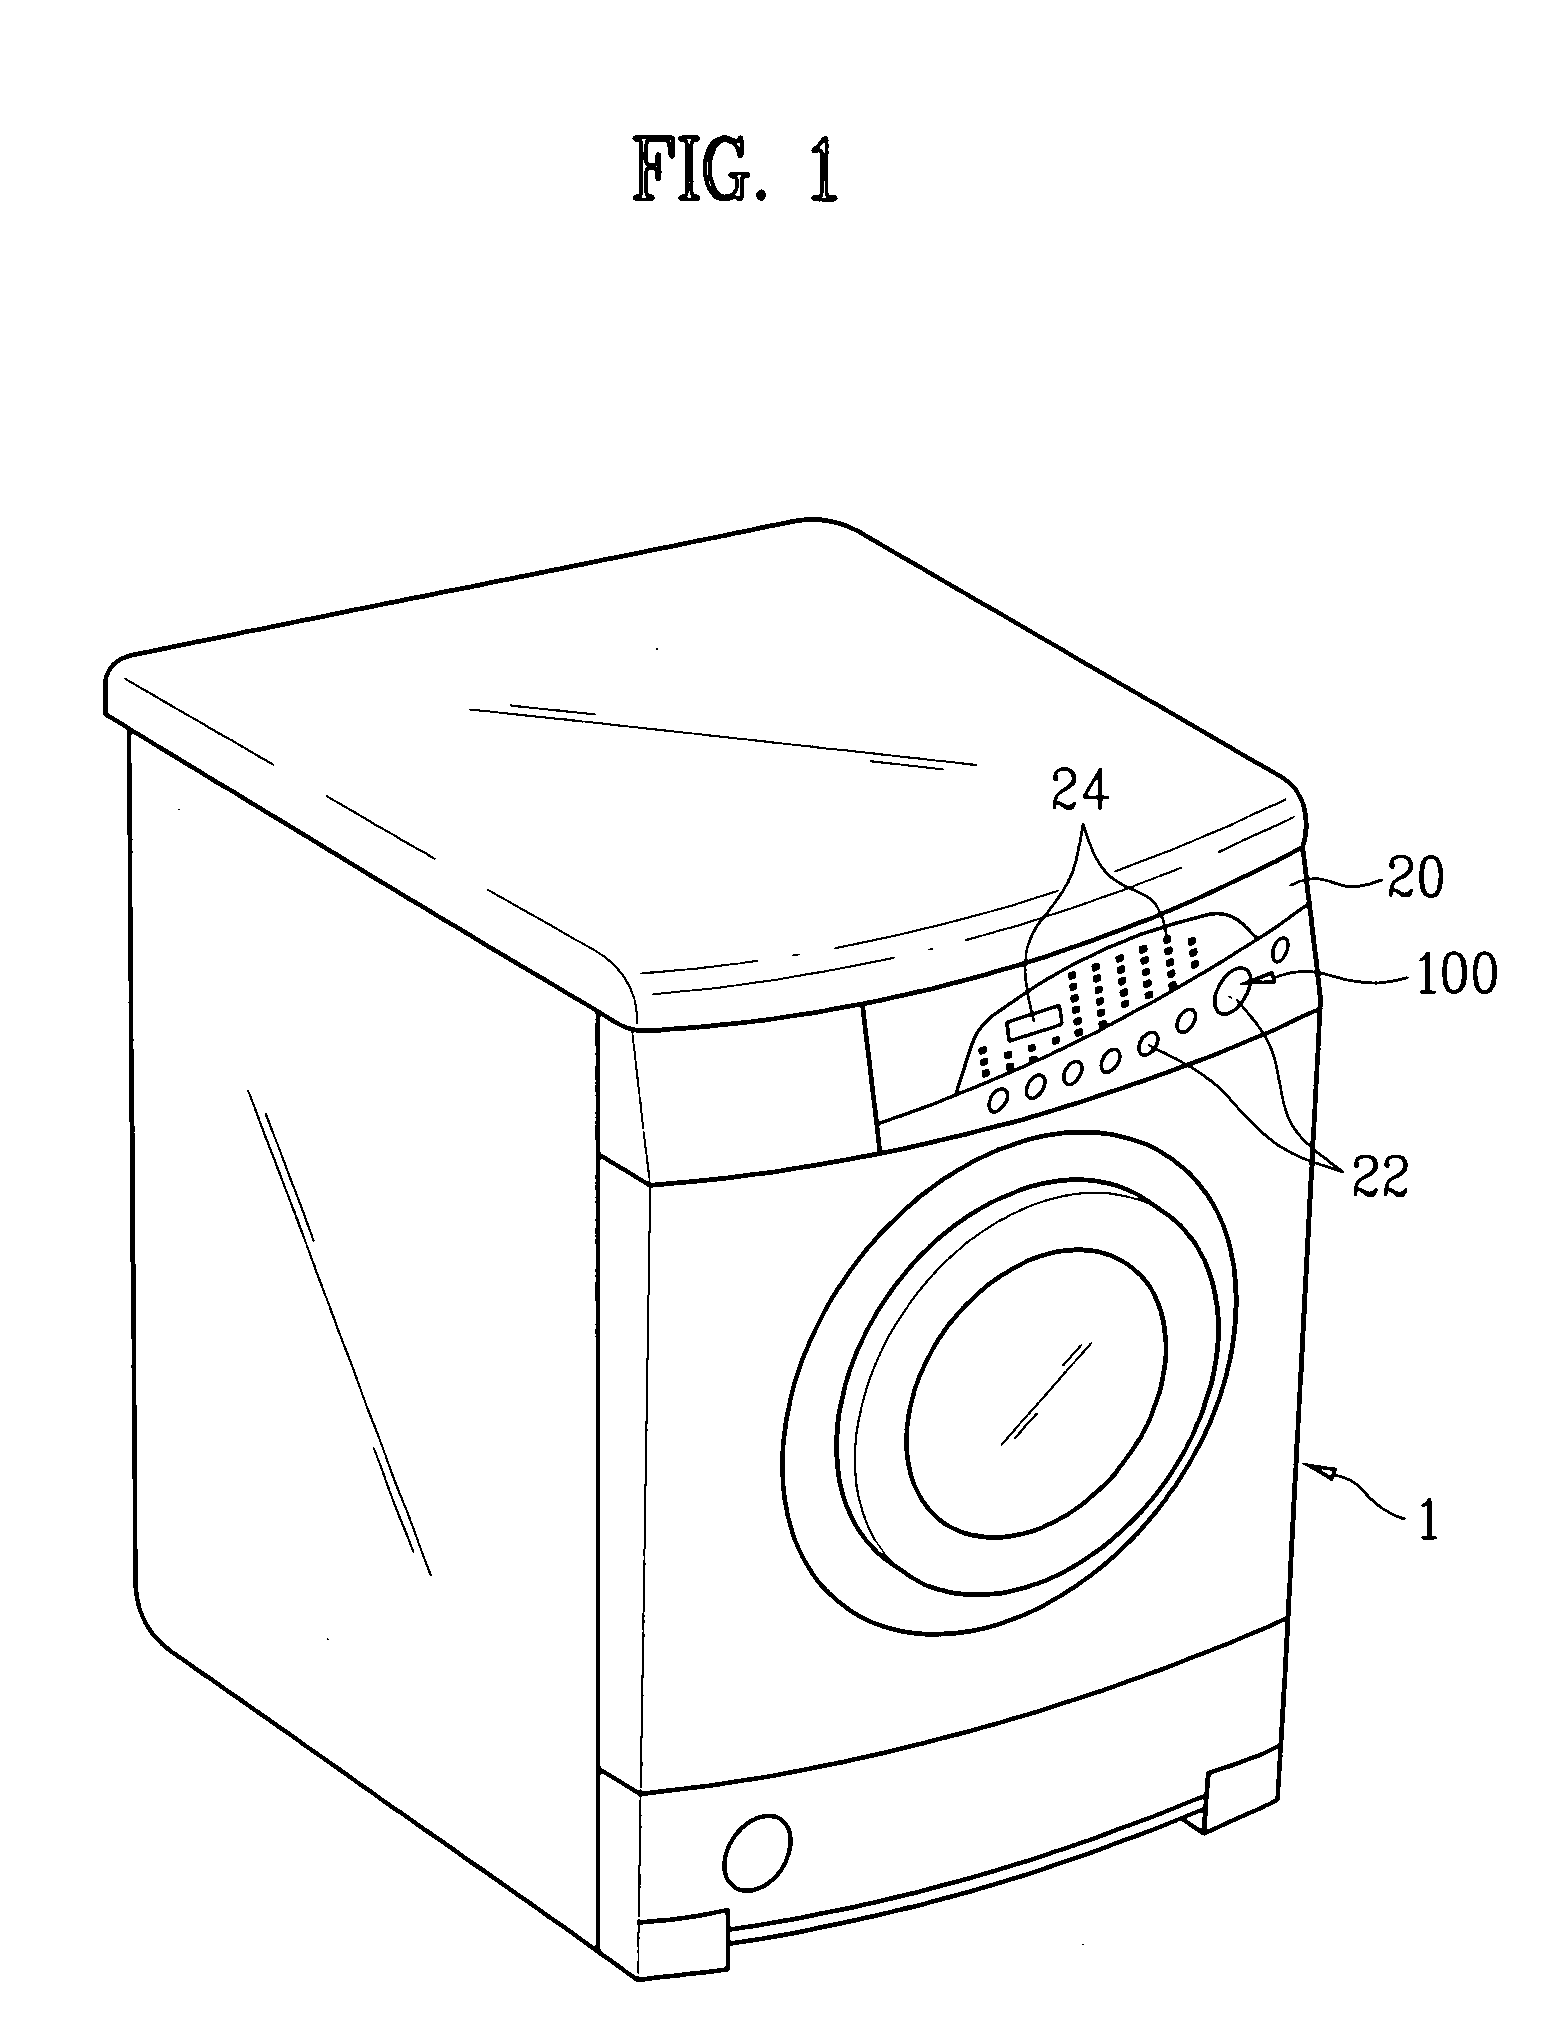 Rotary knob assembly for home appliance